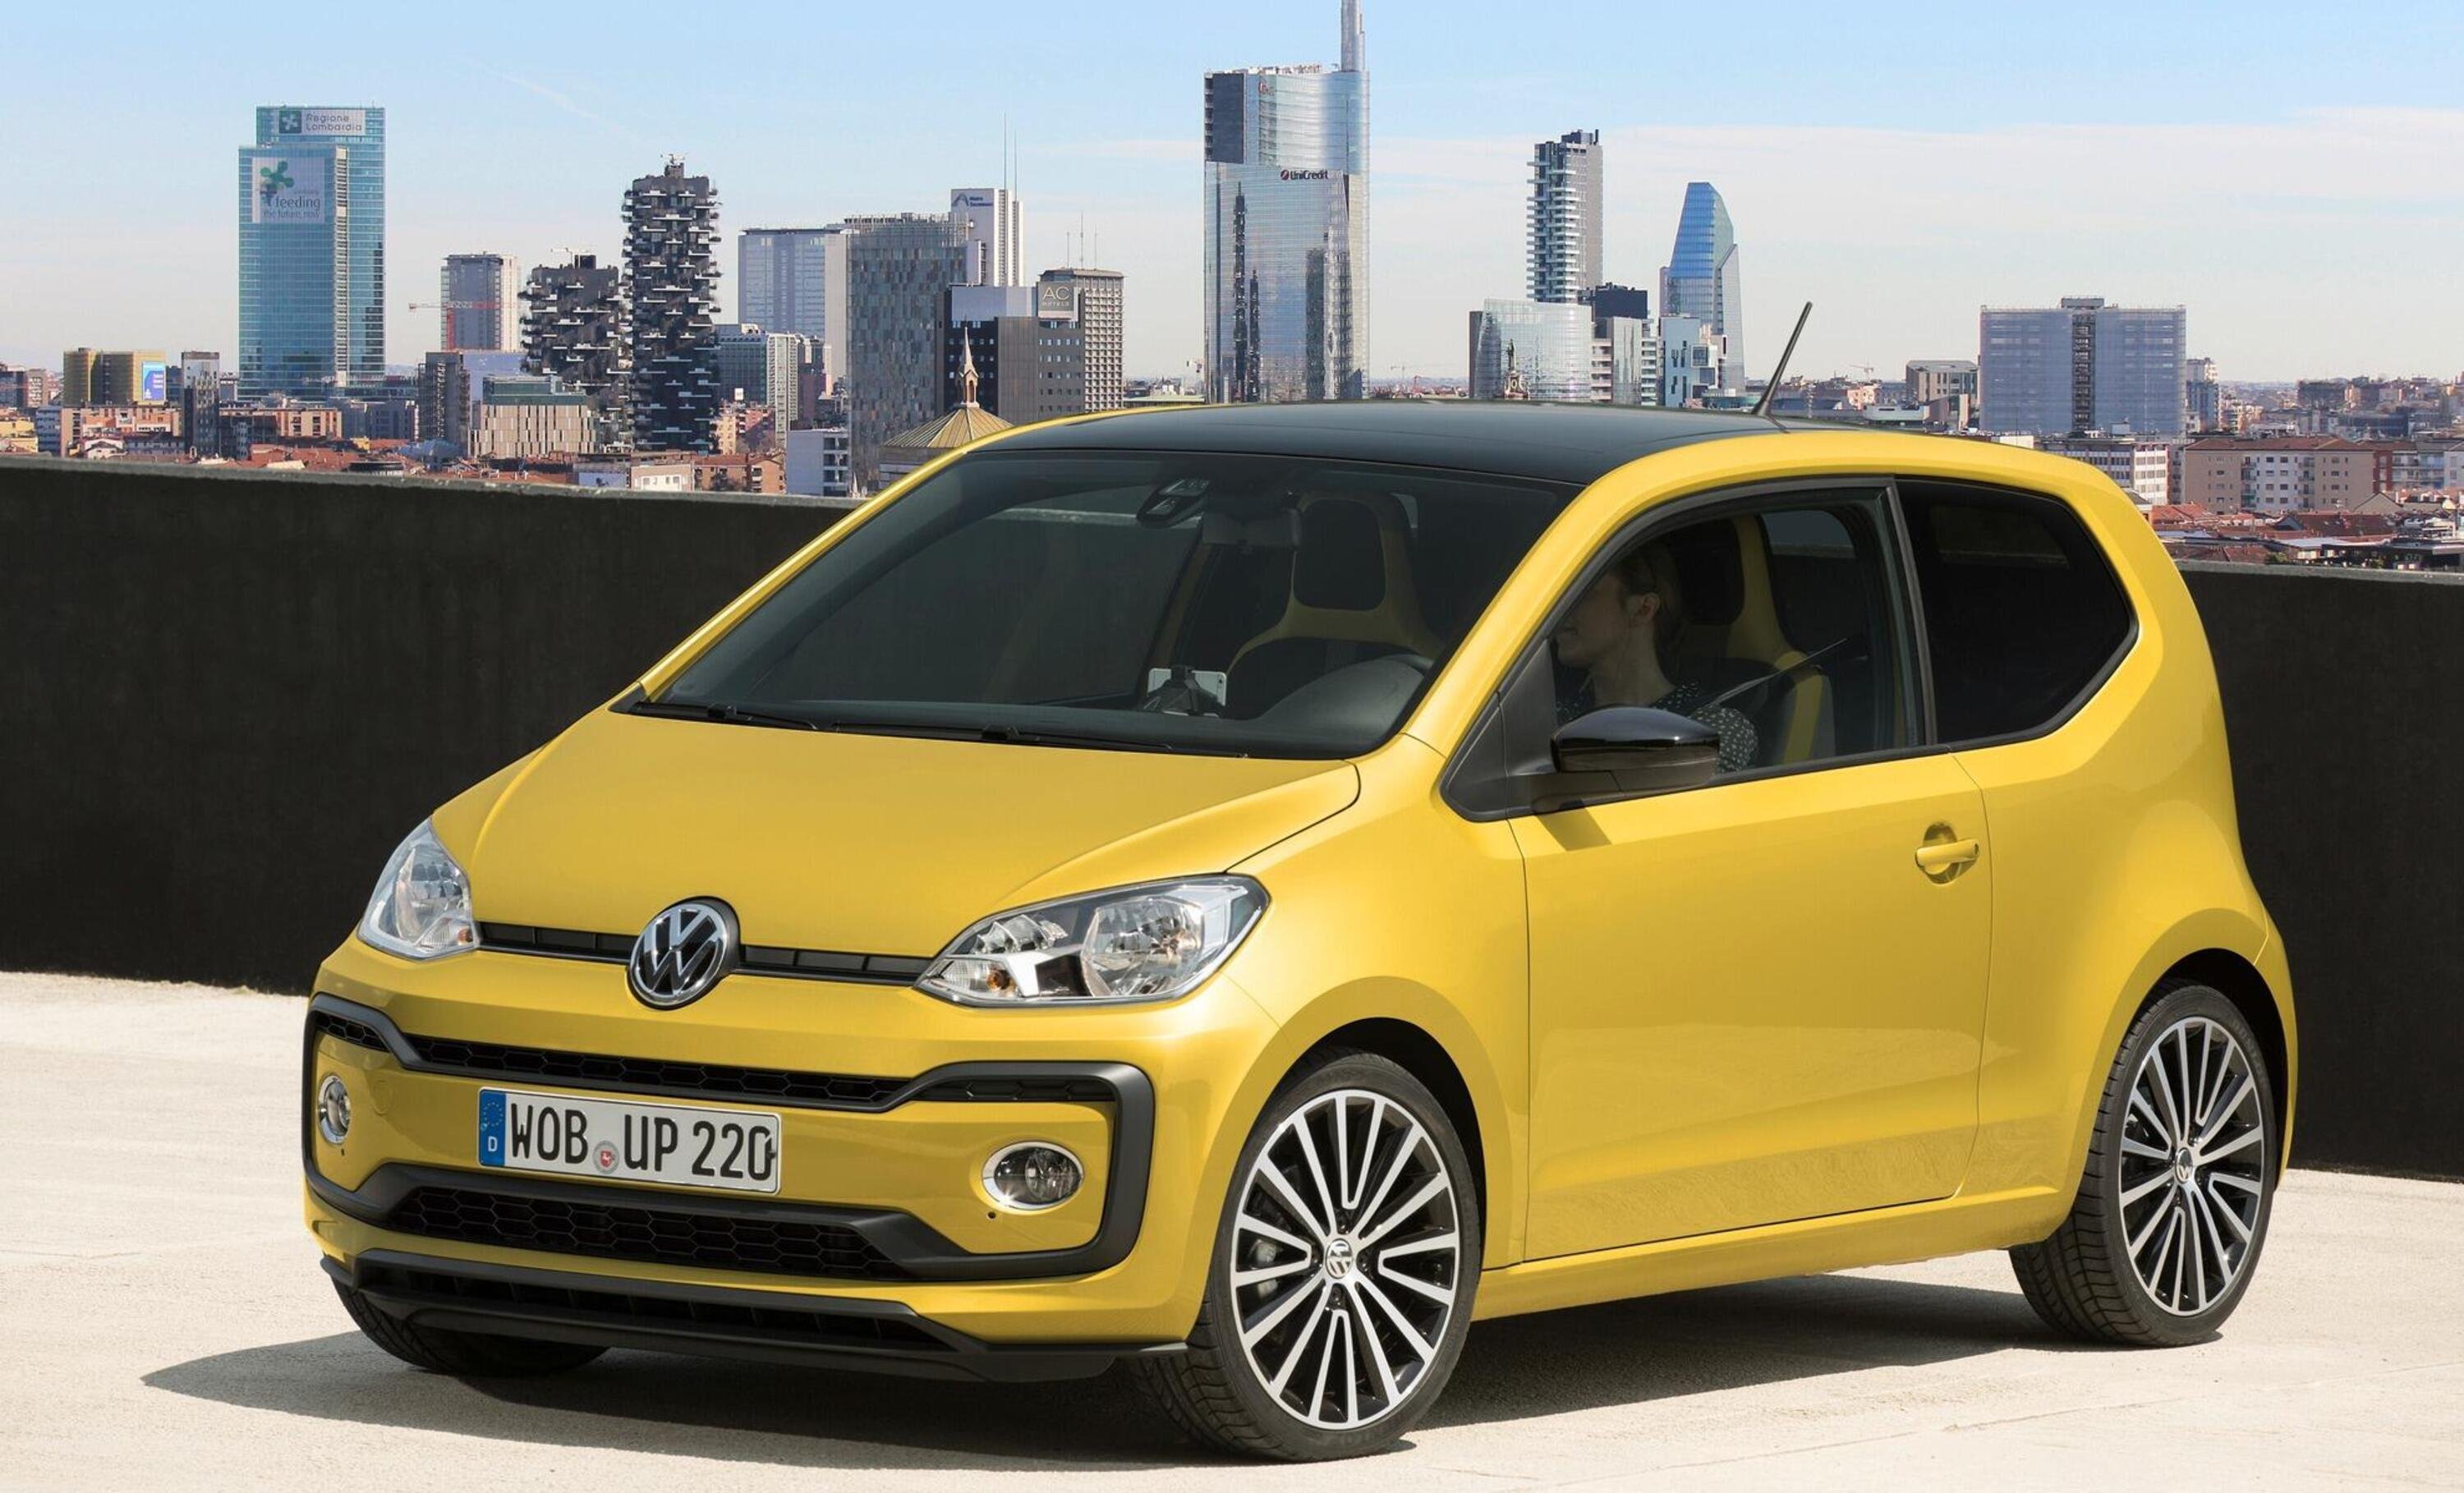 Volkswagen up! 5p. eco high up! BlueMotion Technology 